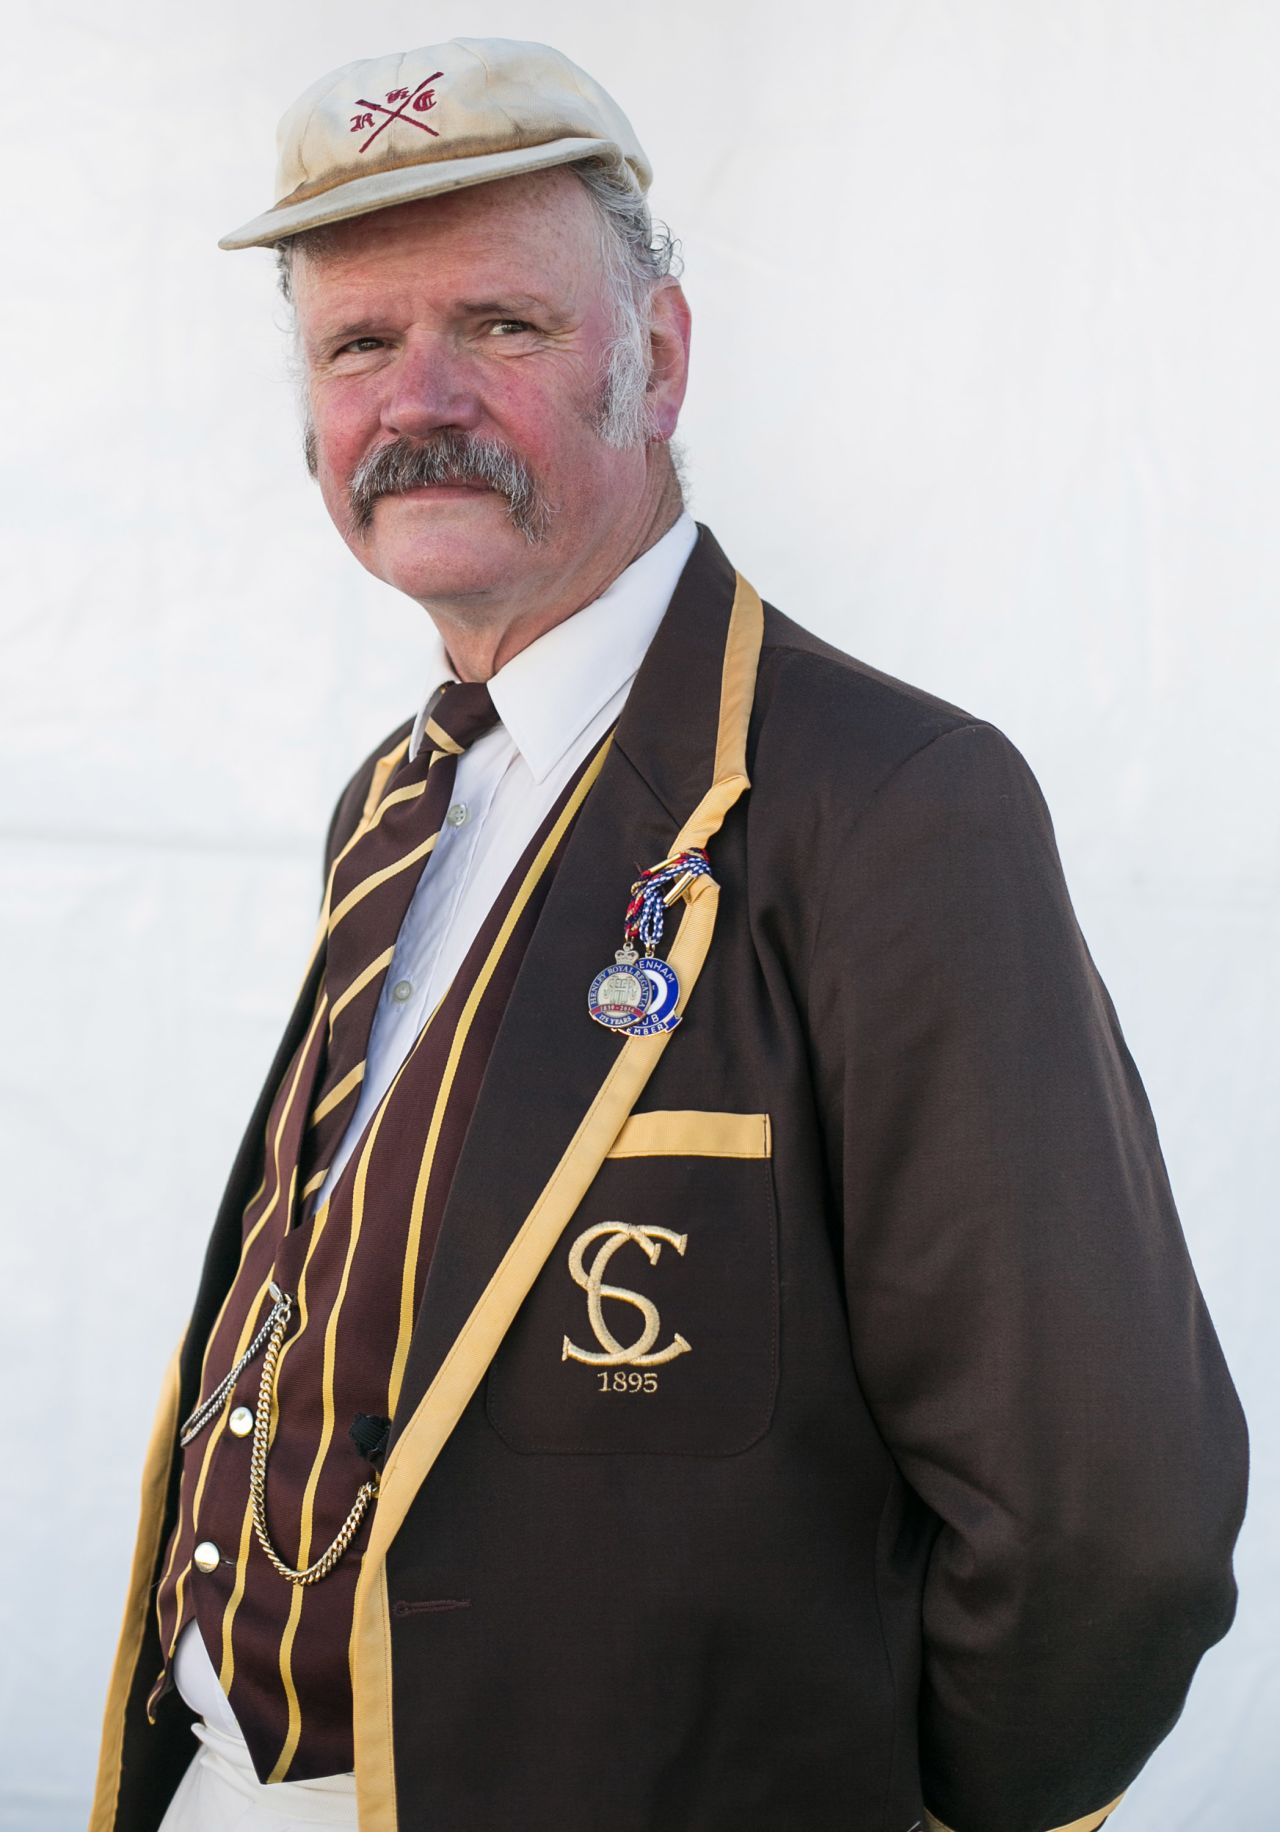 Some attendees, such as Richard Rowland from The Skiff Club in London, take the chance to dress up in traditional uniforms.